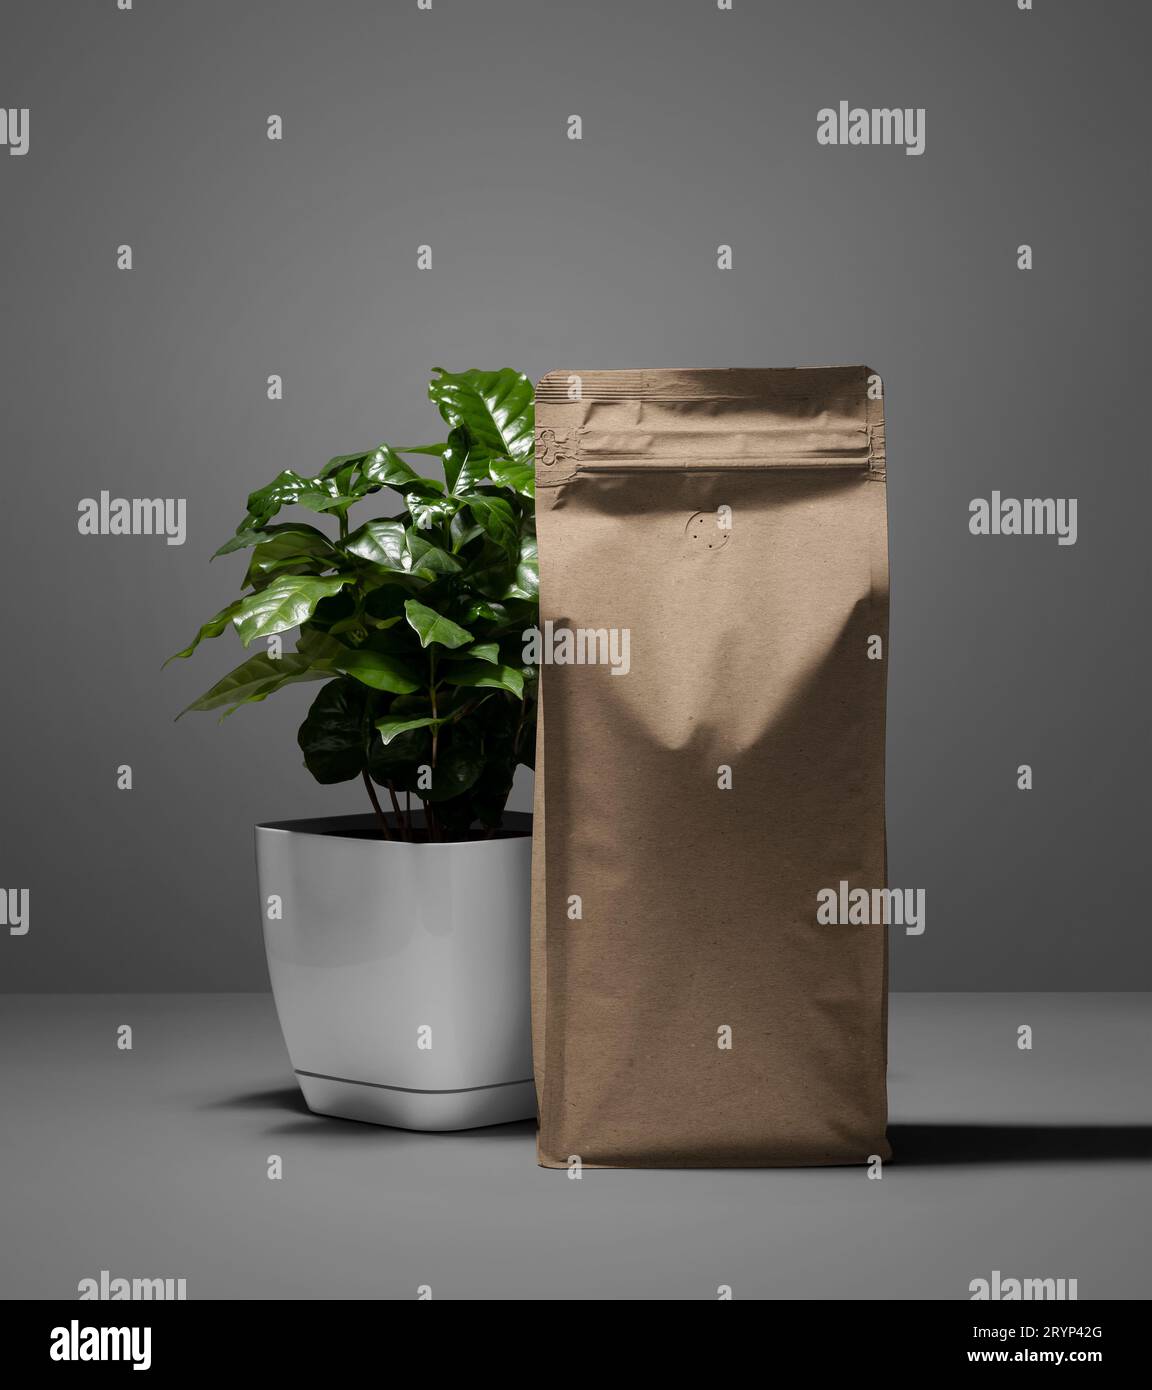 Mockup of coffee packaging made of kraft paper. Zip bag template next to a potted arabica tree. Blank pack for design, print, pattern, branding. Front Stock Photo